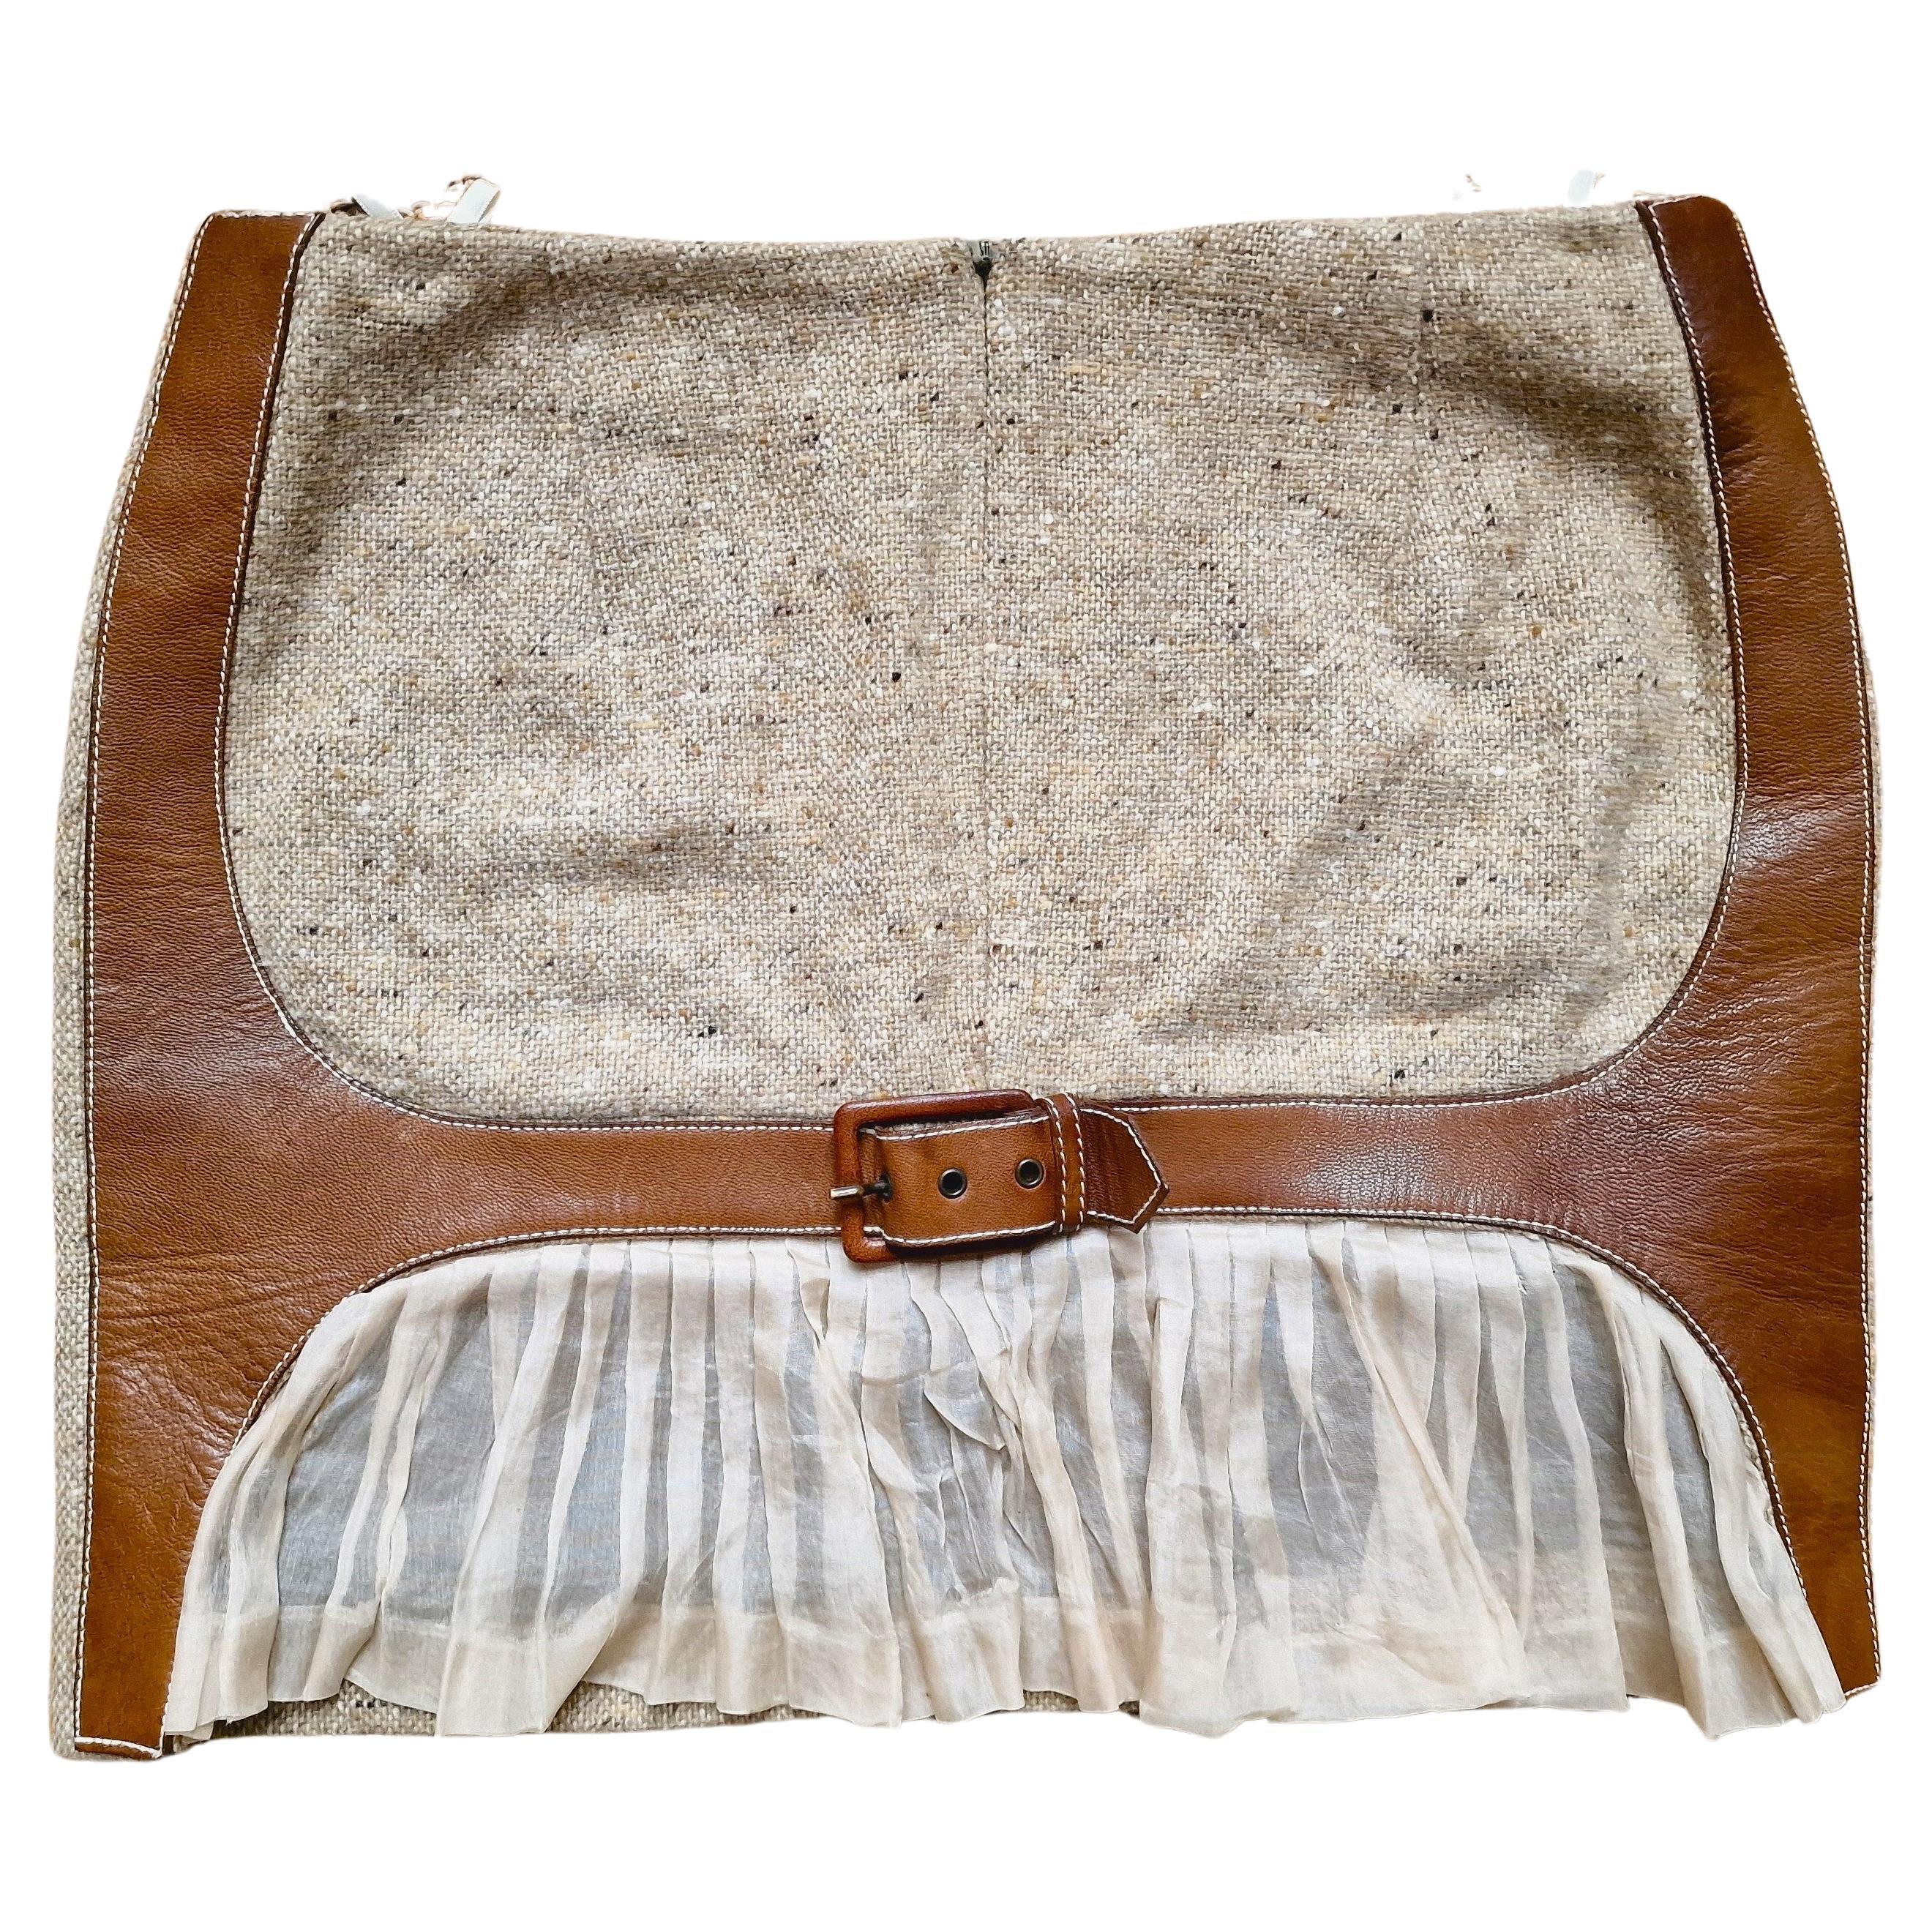 Early Alexander McQueen Tweed Wool Leather Beige S/S 2003 Irere Collection Skirt For Sale